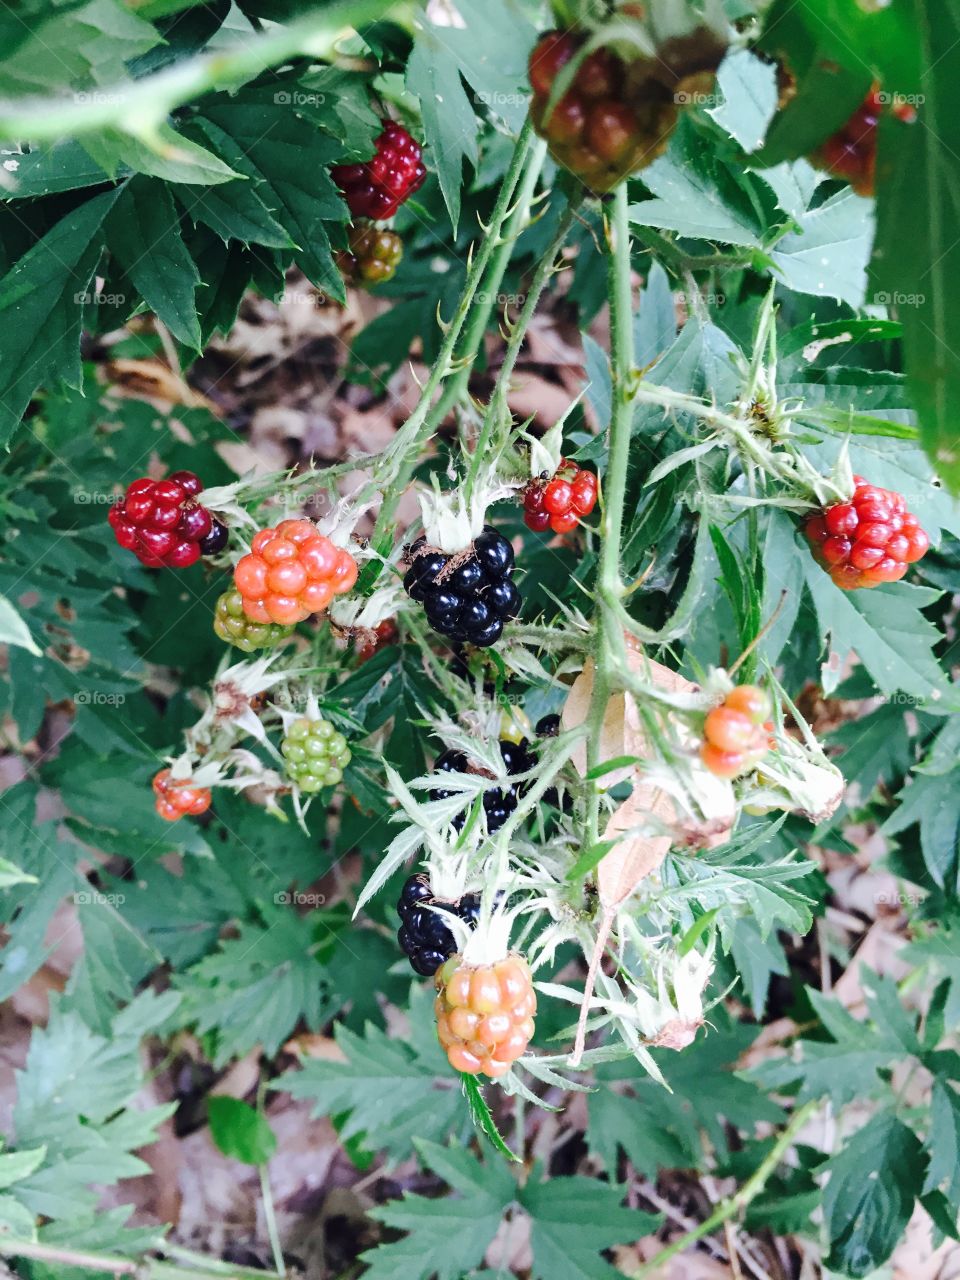 Wild berries . A walk in the park